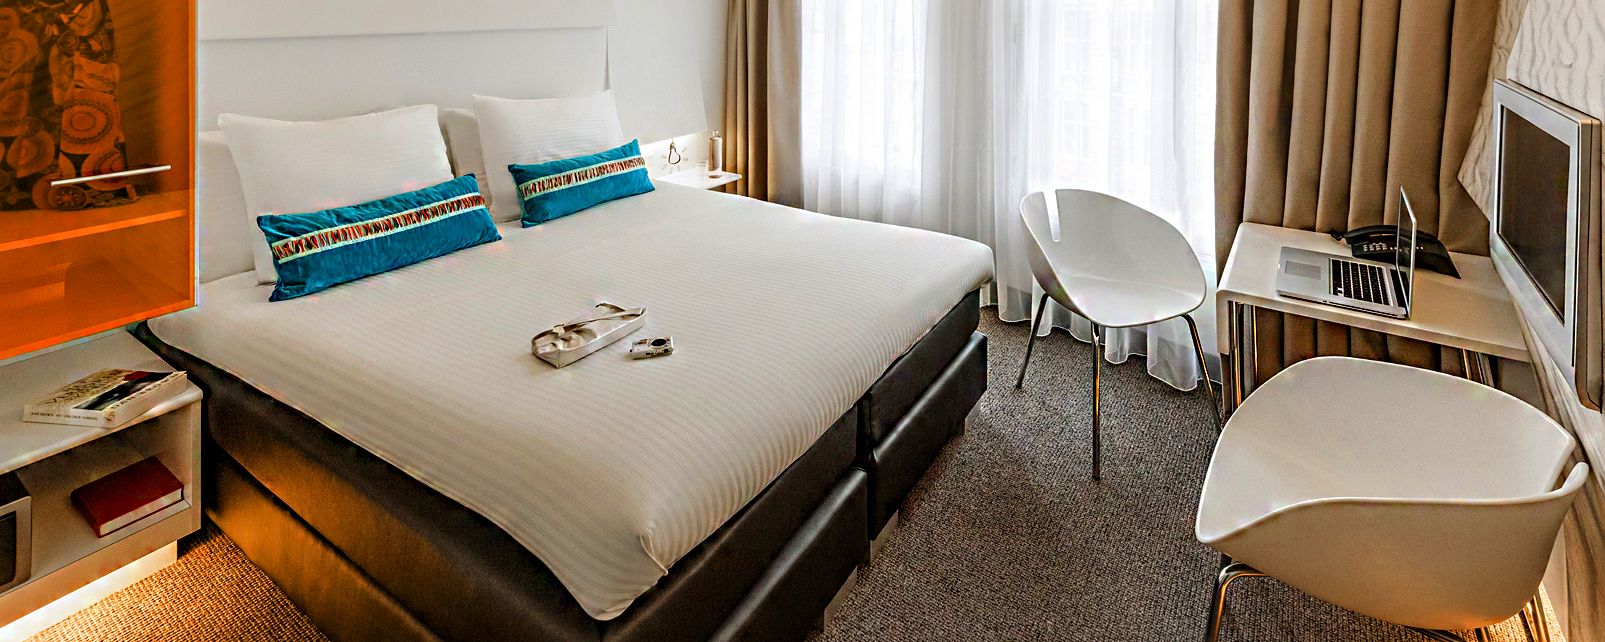 Hotel Ibis Styles Amsterdam Central Station